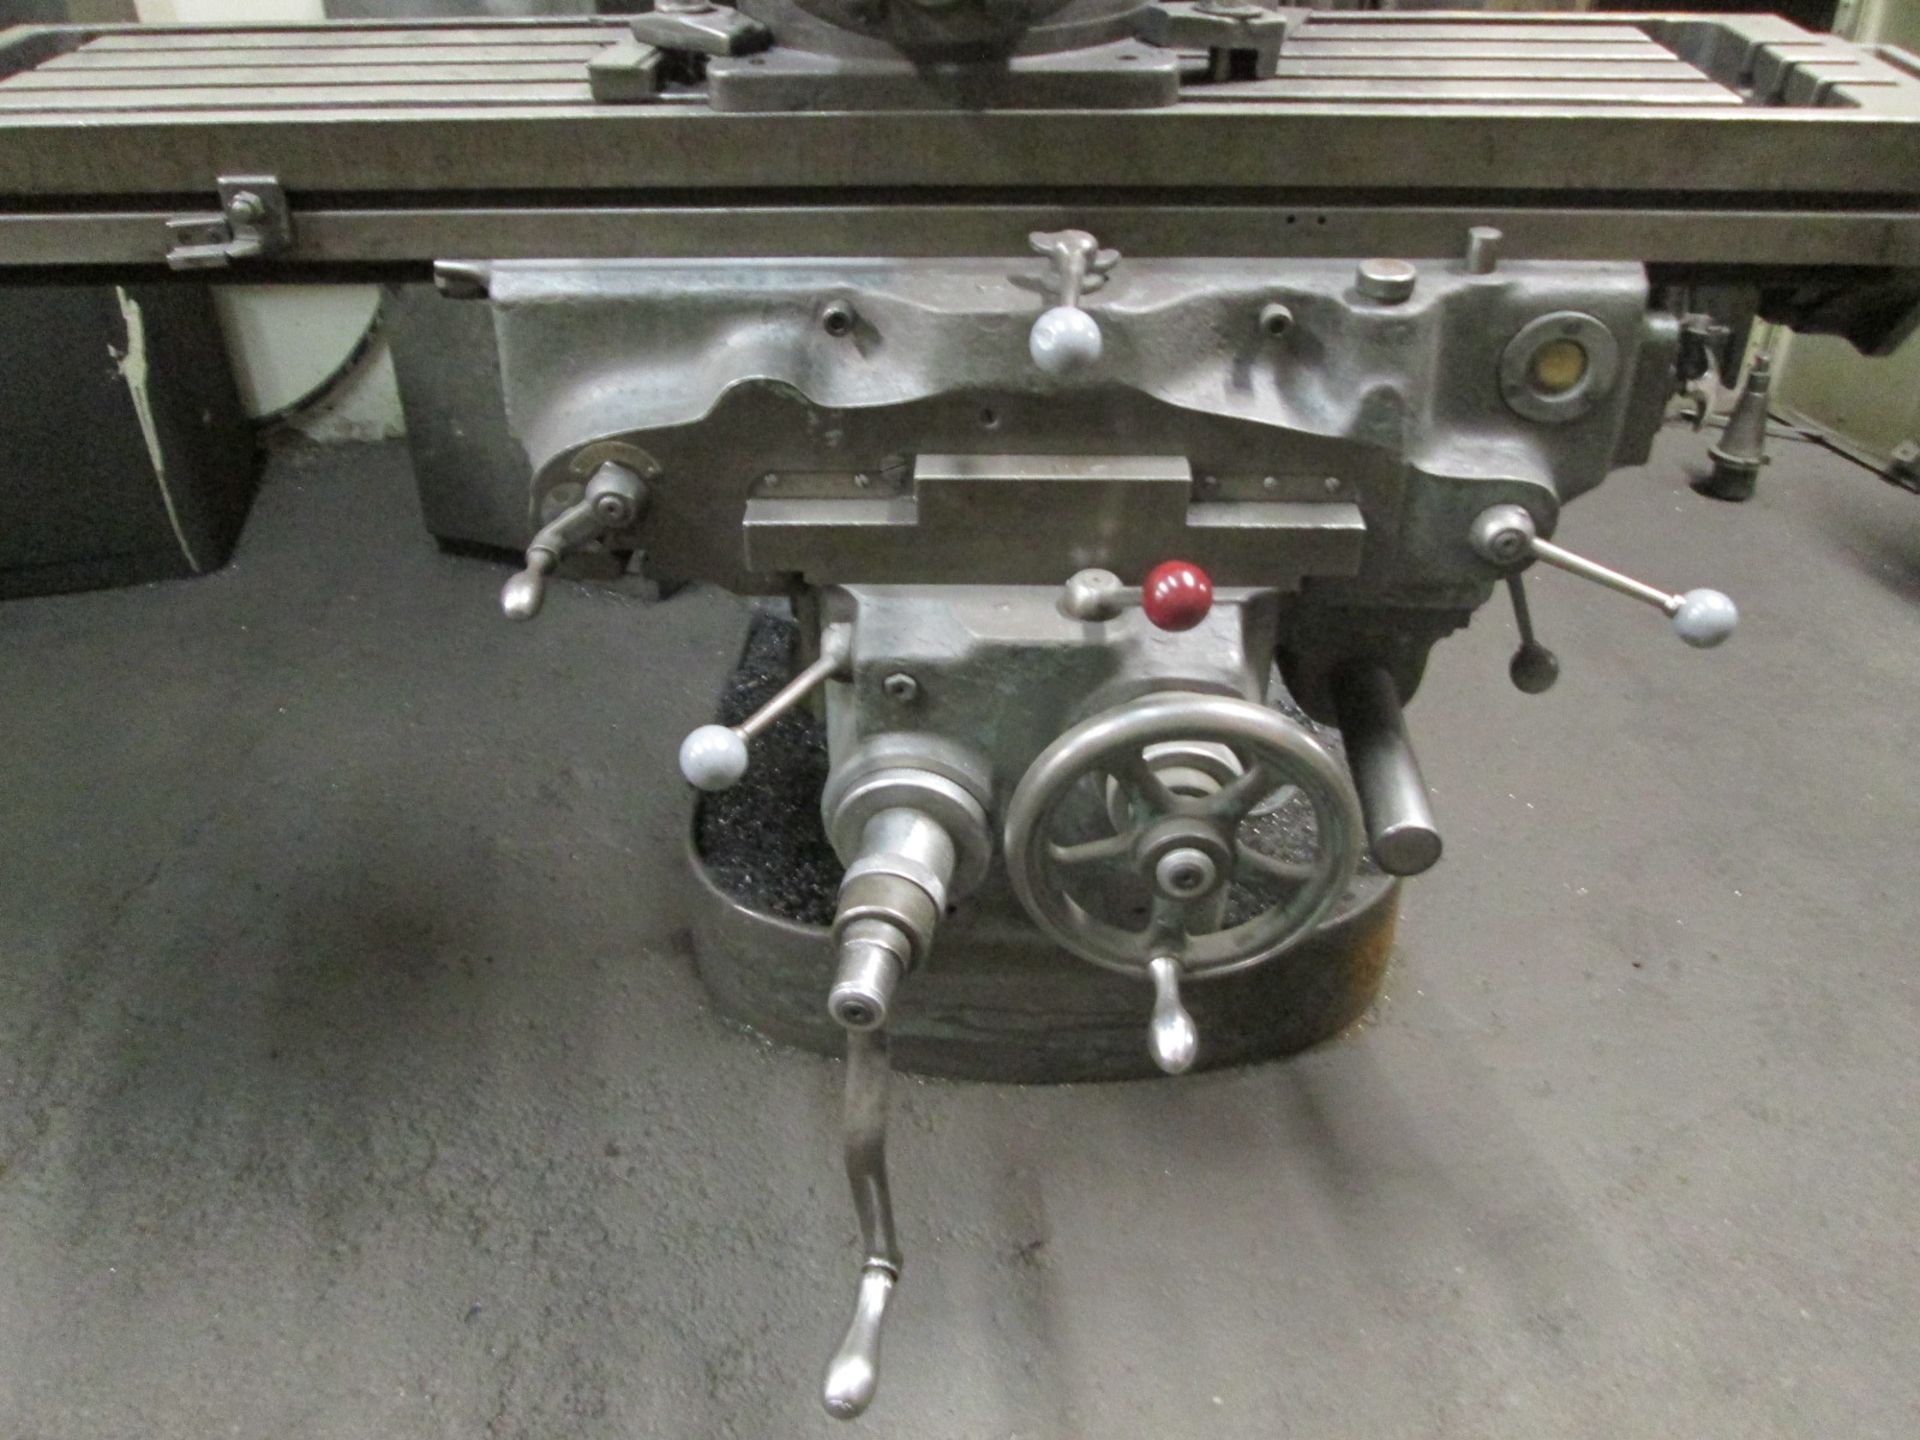 Cincinnati No 3 Vertical Milling Machine, Table size 1360 mm x 310 mm, Spindle speeds 20-1200 rpm, - Image 7 of 12